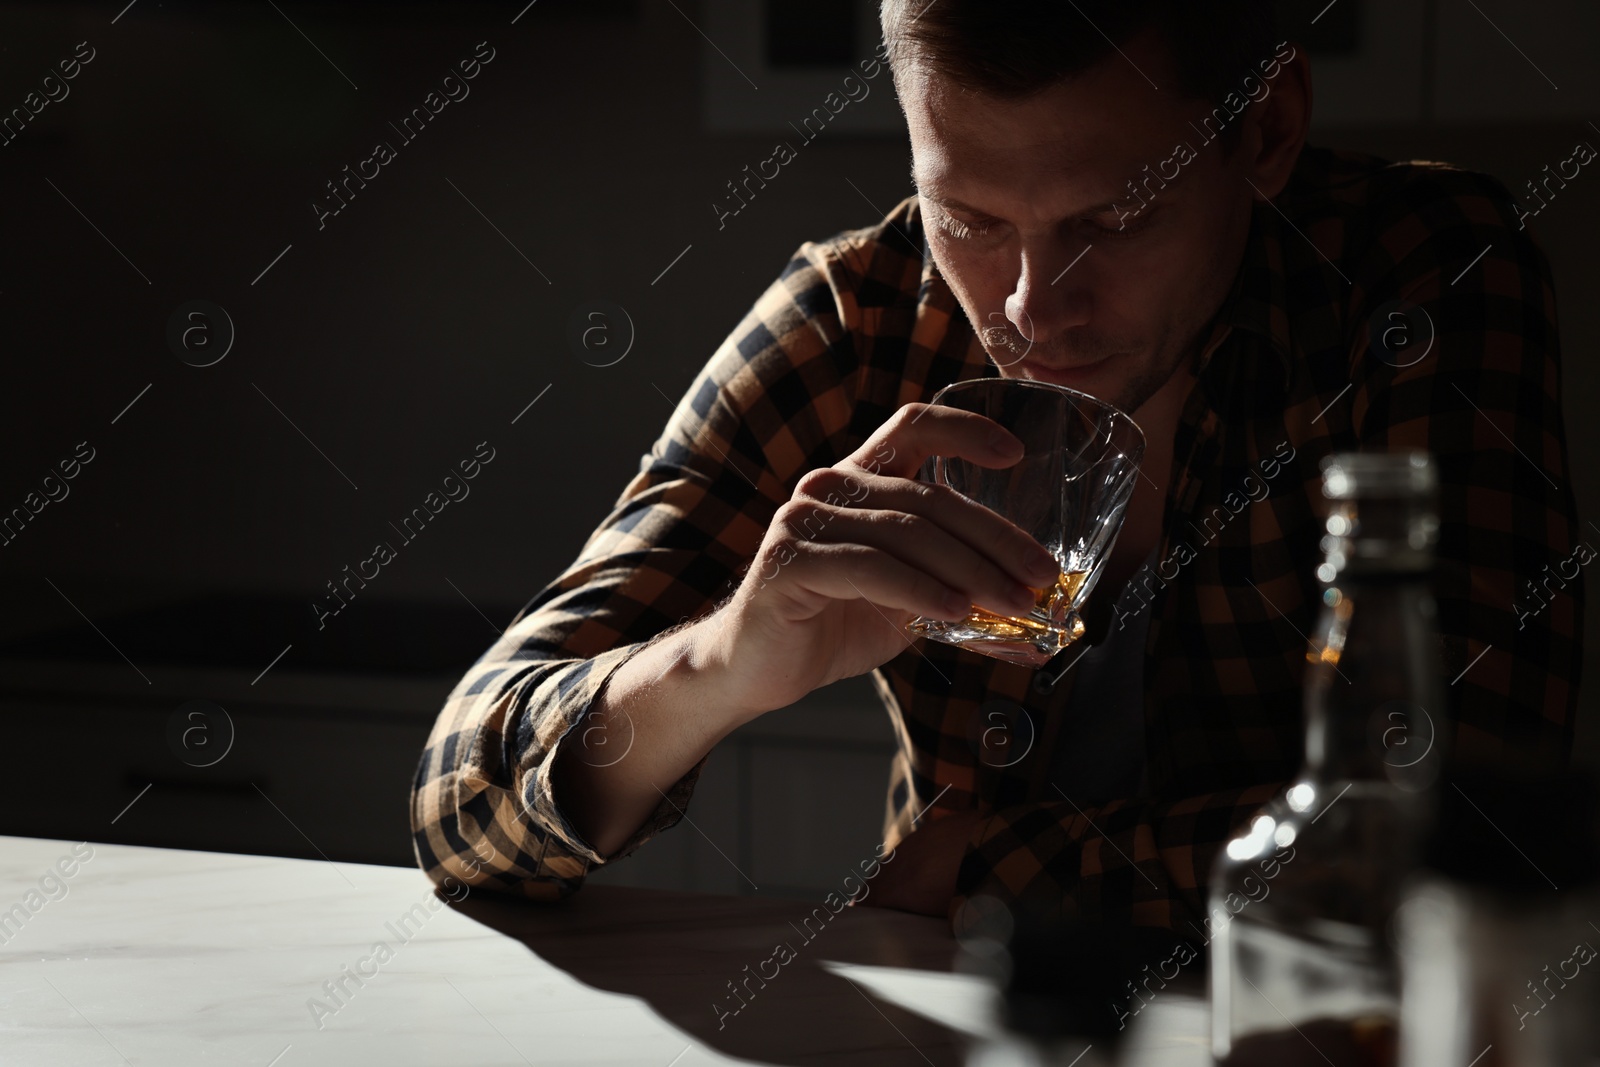 Photo of Addicted man drinking alcohol at table in kitchen